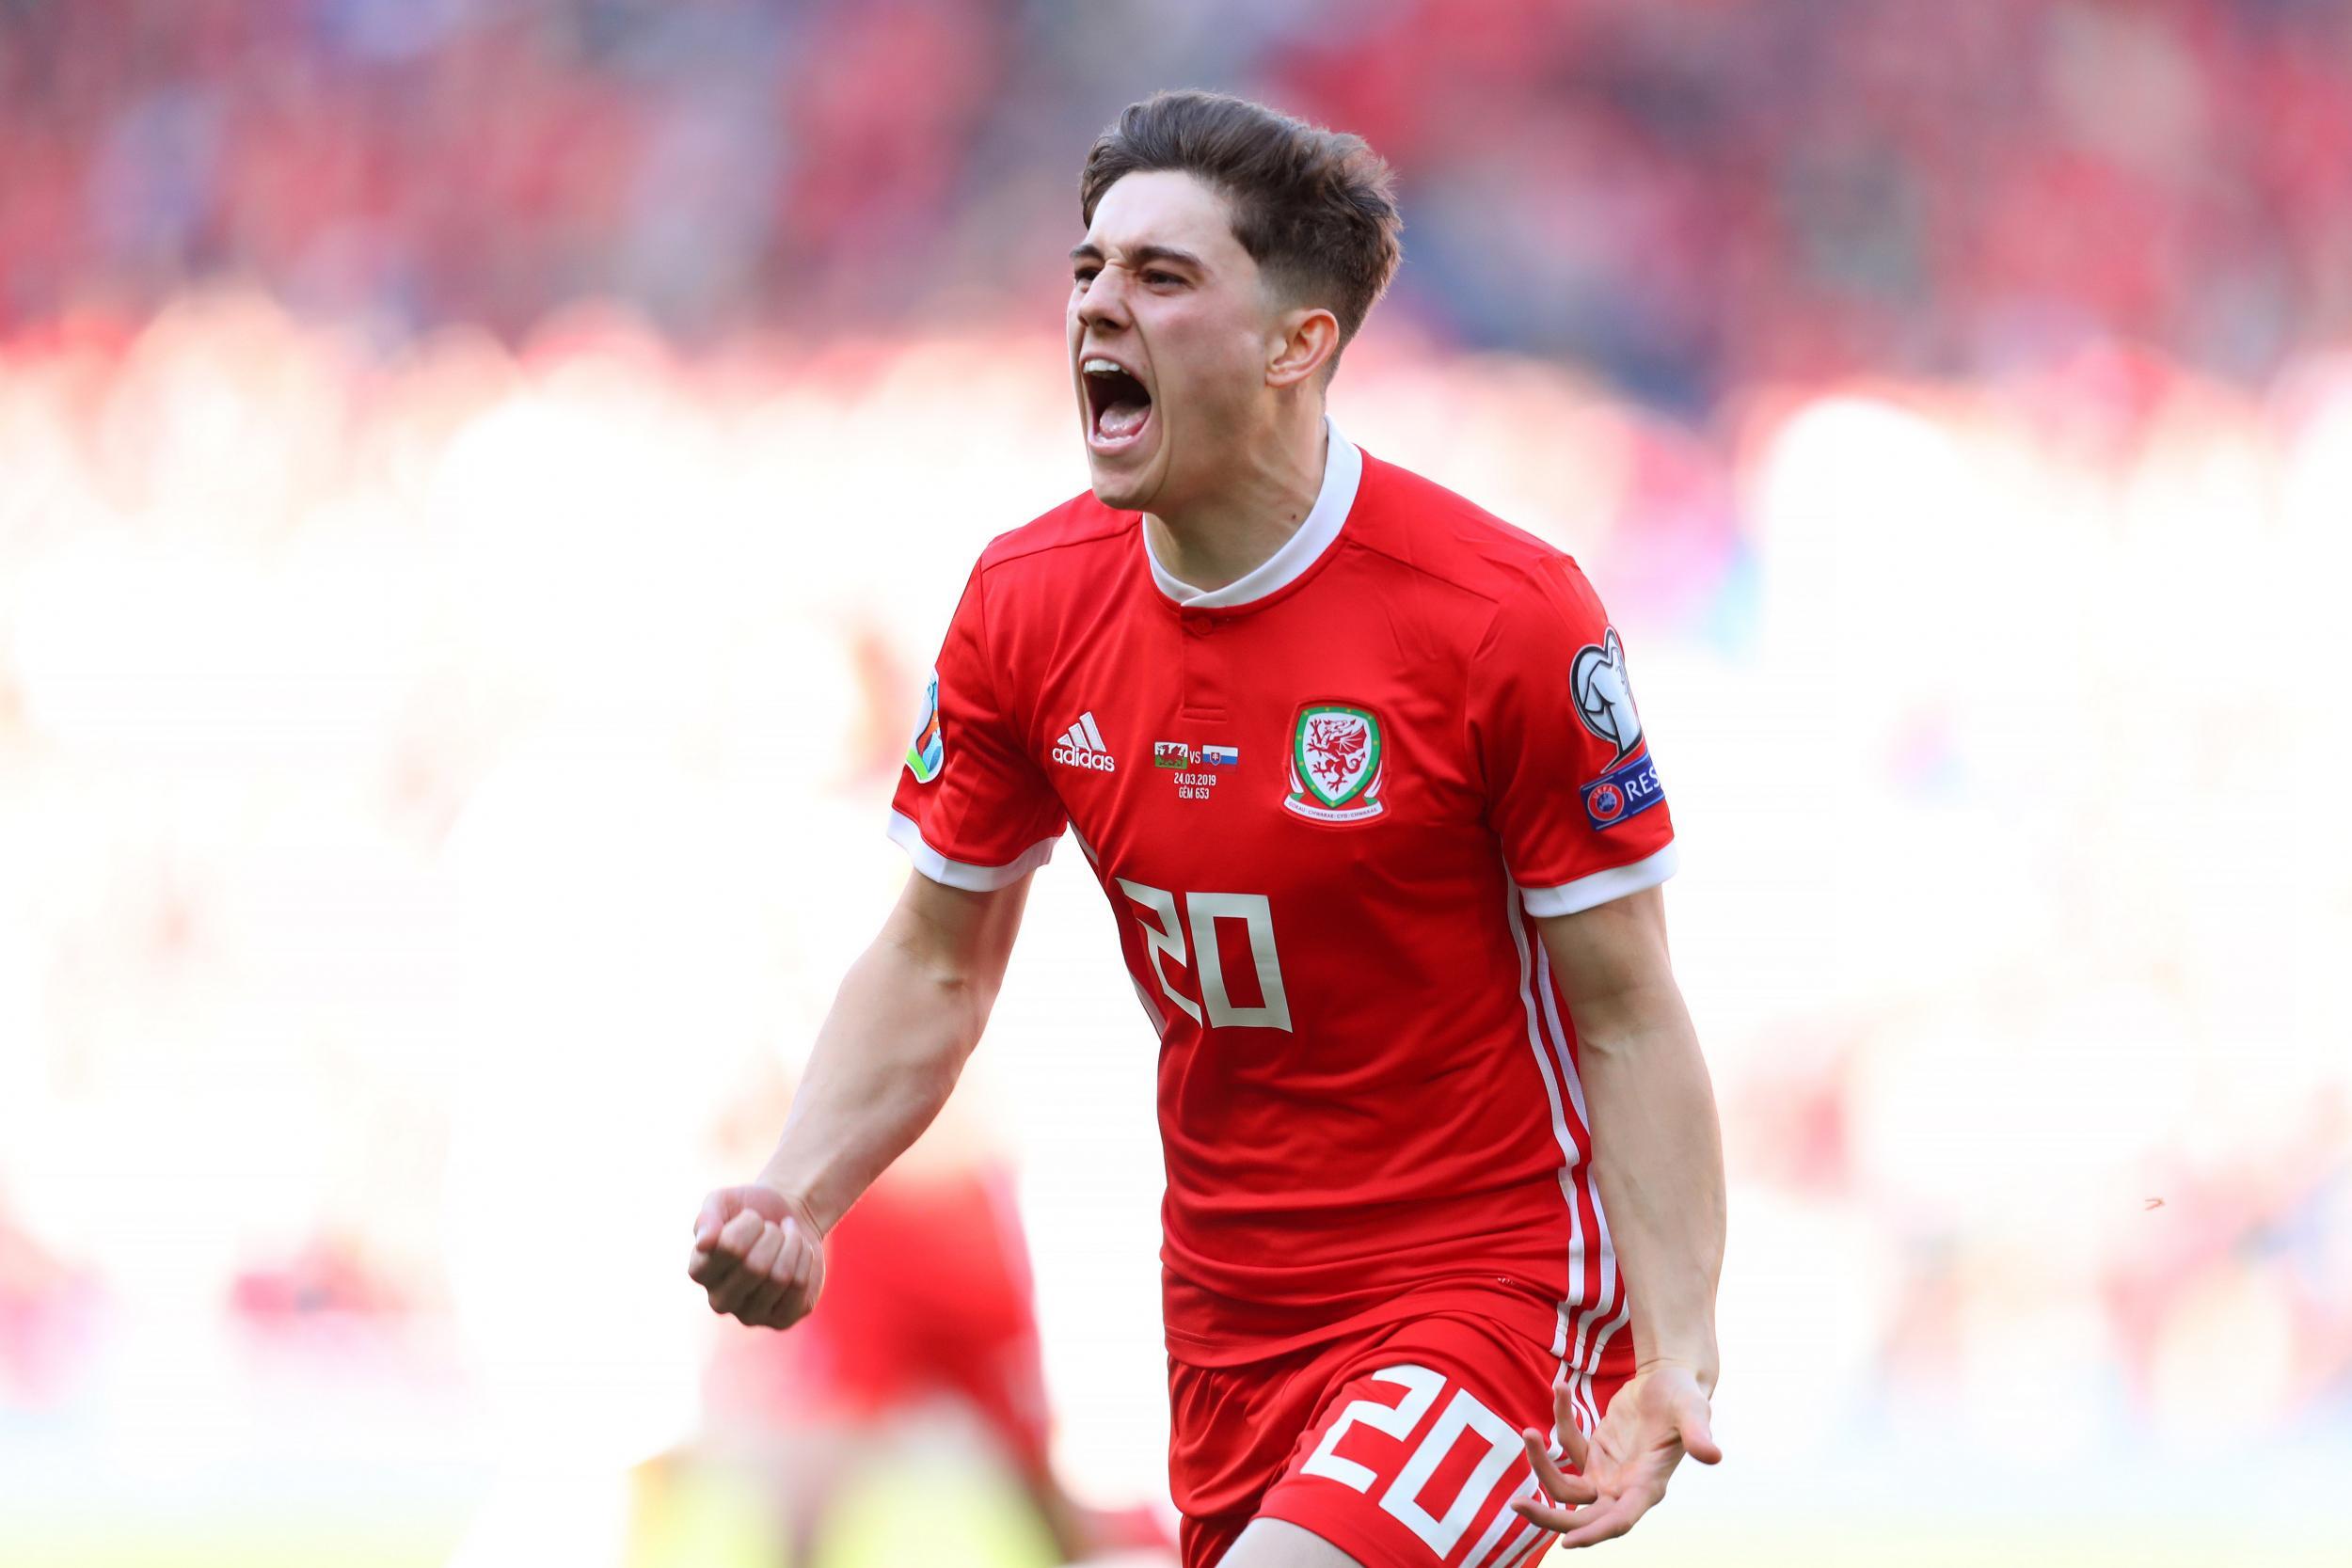 Daniel James has heart set on Man United move with Swansea deal